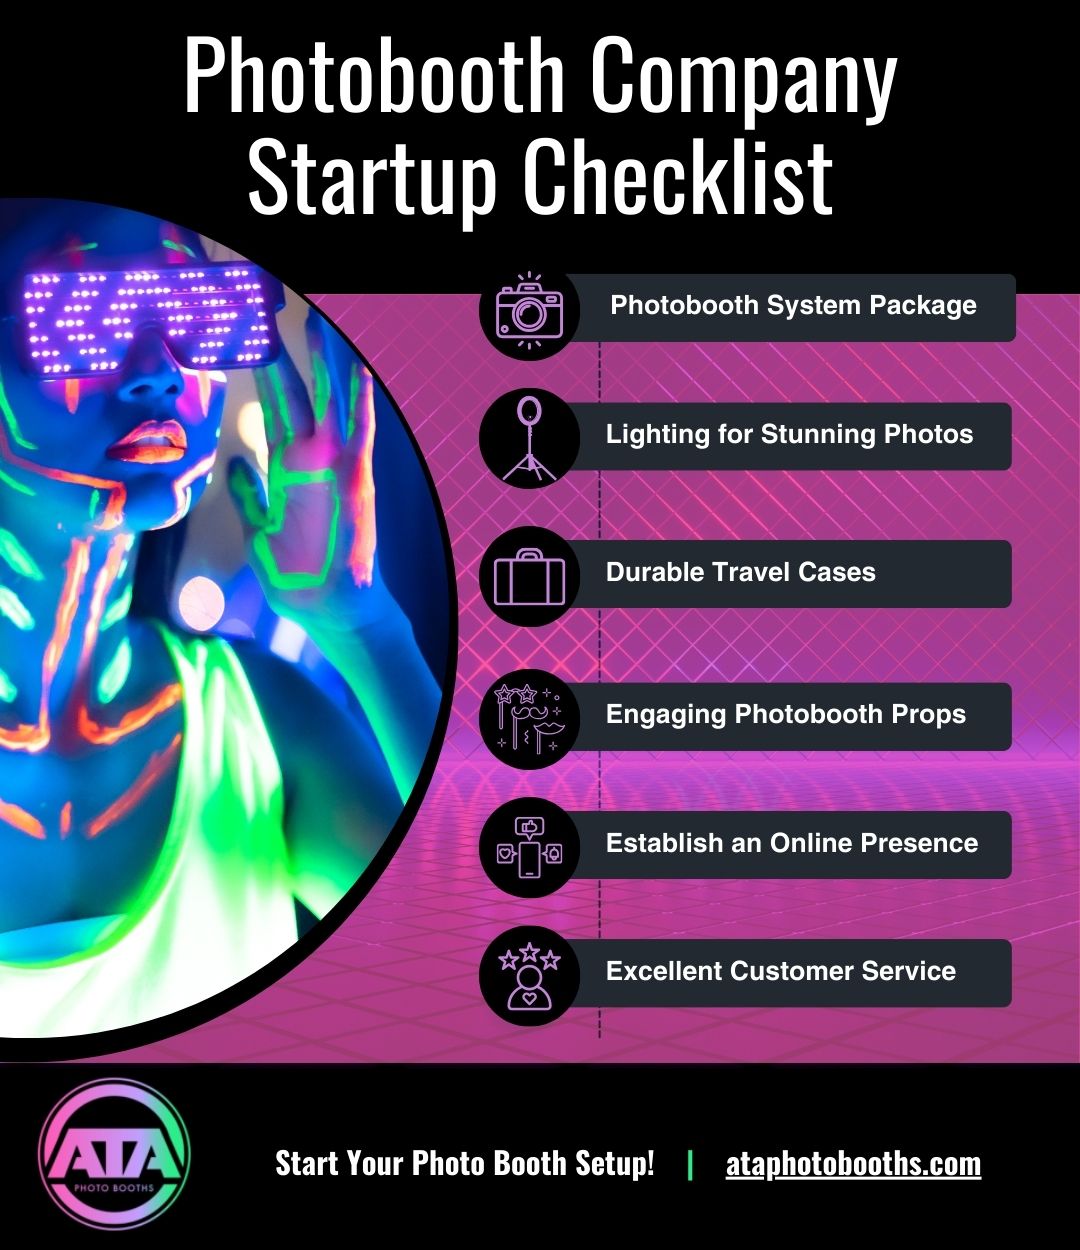 an infographic with a startup checklist for new photobooth owners